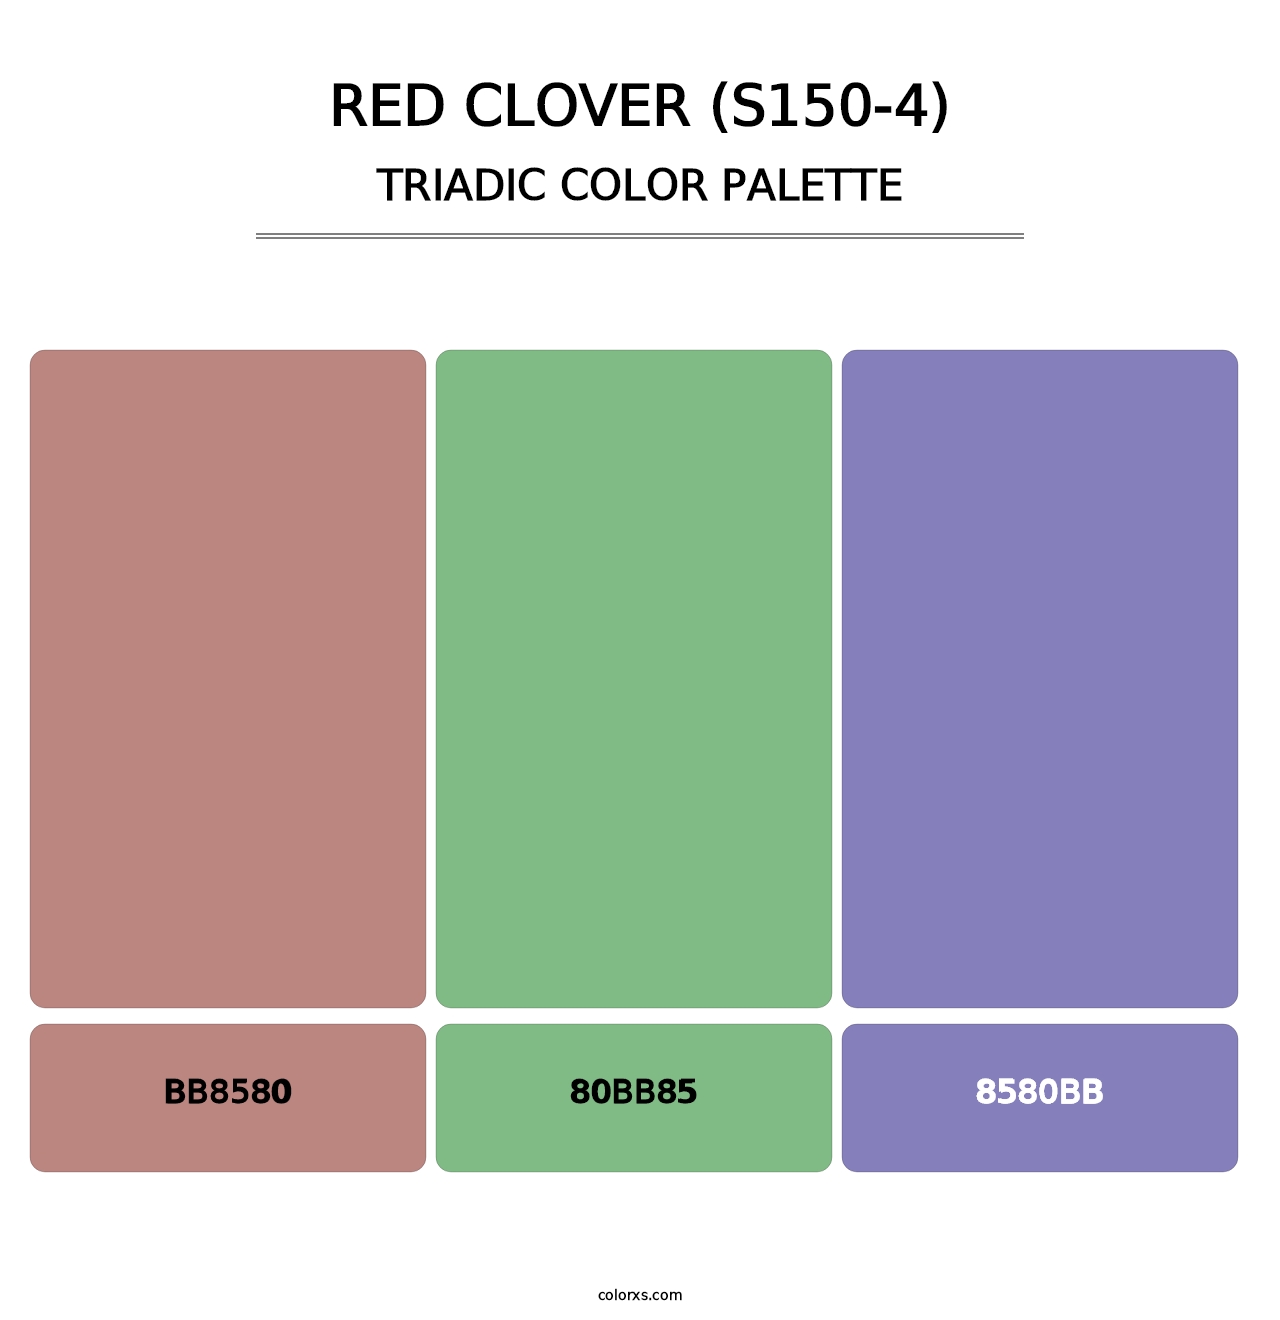 Red Clover (S150-4) - Triadic Color Palette